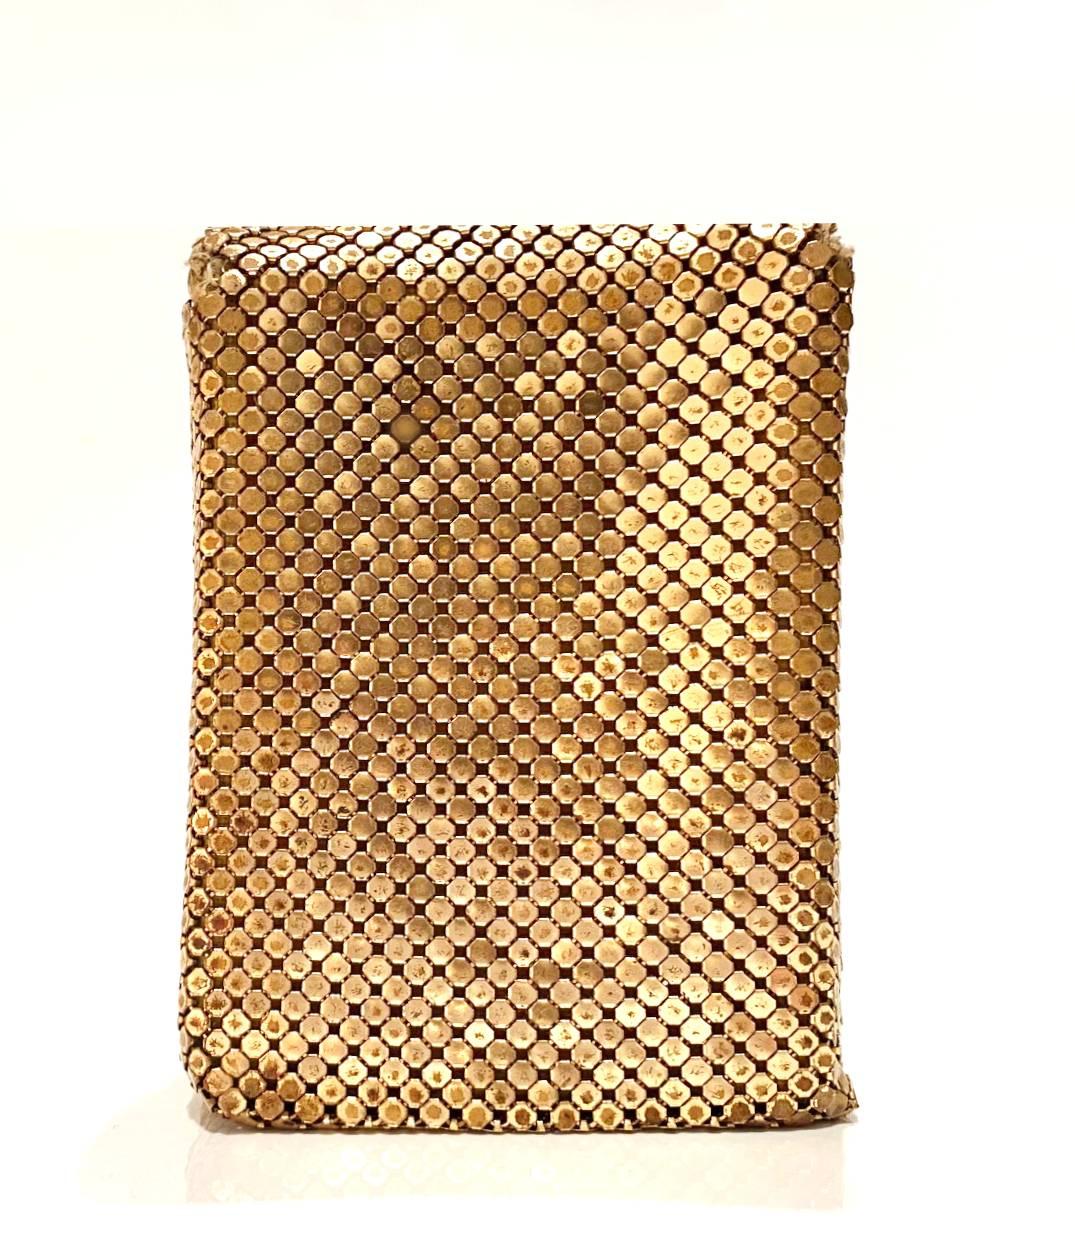 Rare Gucci Gold mesh metal smoking box, front logo plaque, rigid box structure, opening top 
Condition: vintage, 1980s, good, shows signs of use in and out, some scuff on liner as shown in pictures, overall good condition, top opens